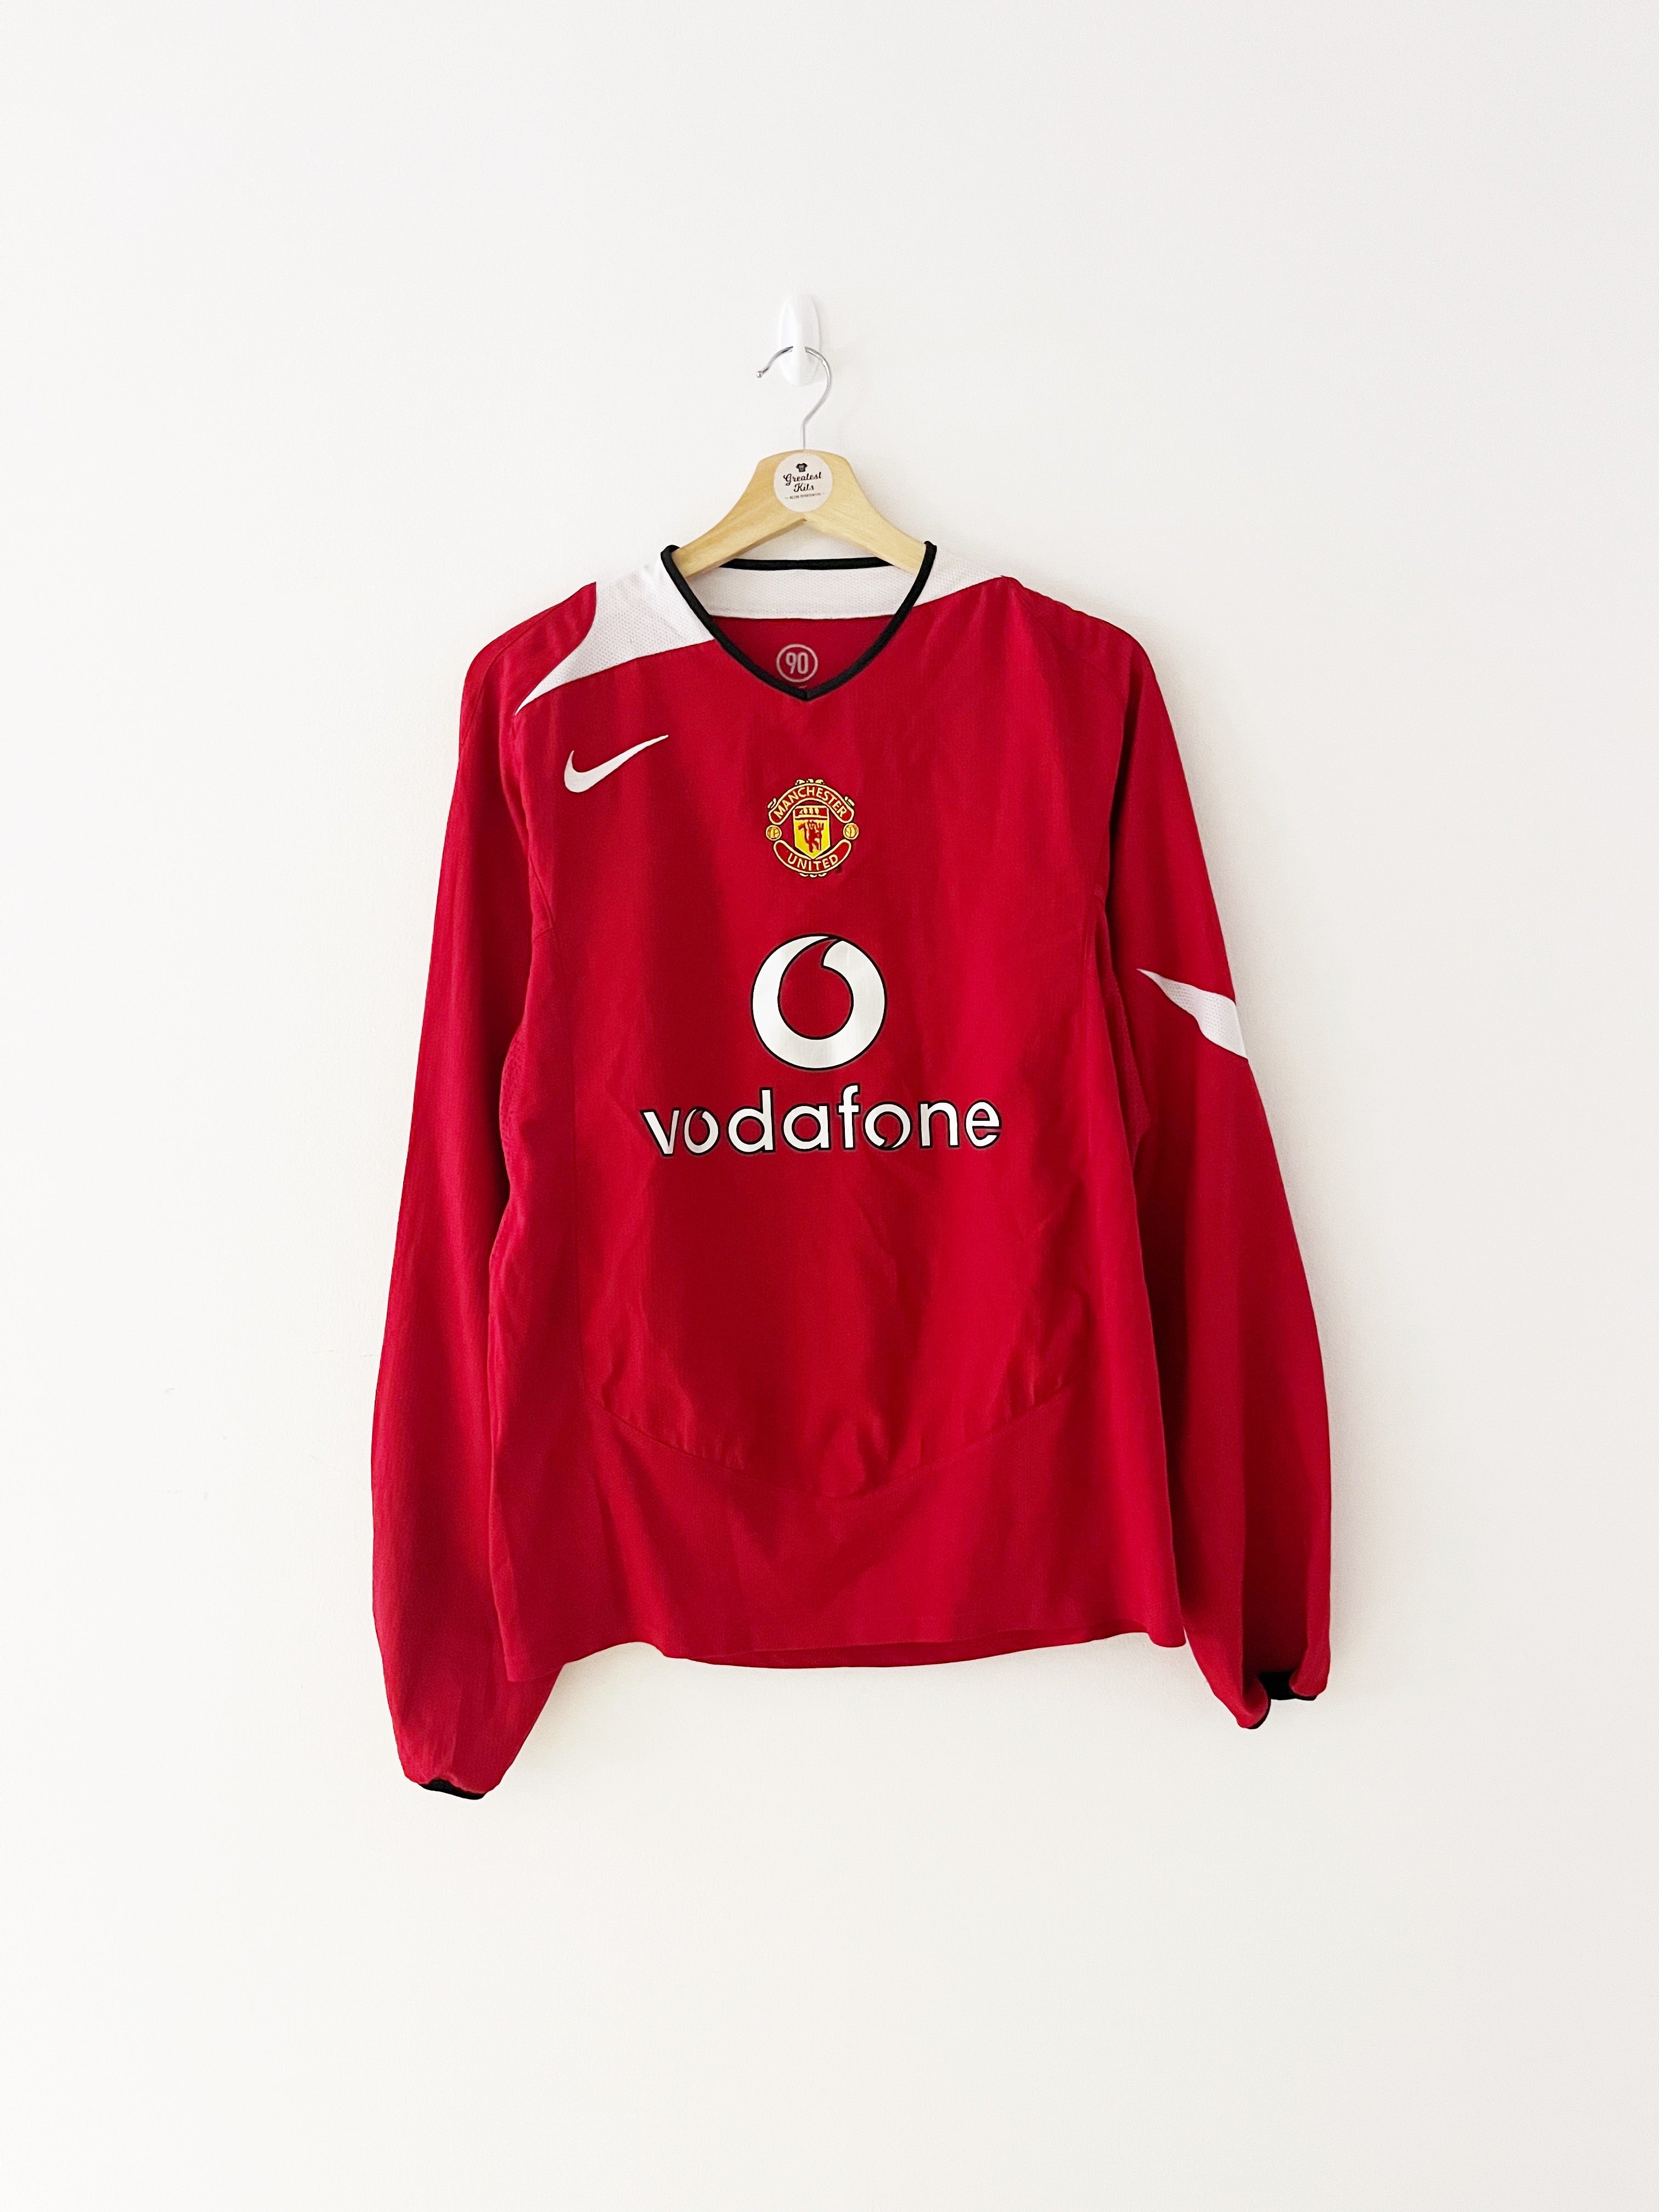 2004/06 Manchester United Home L/S Shirt (M) 9/10